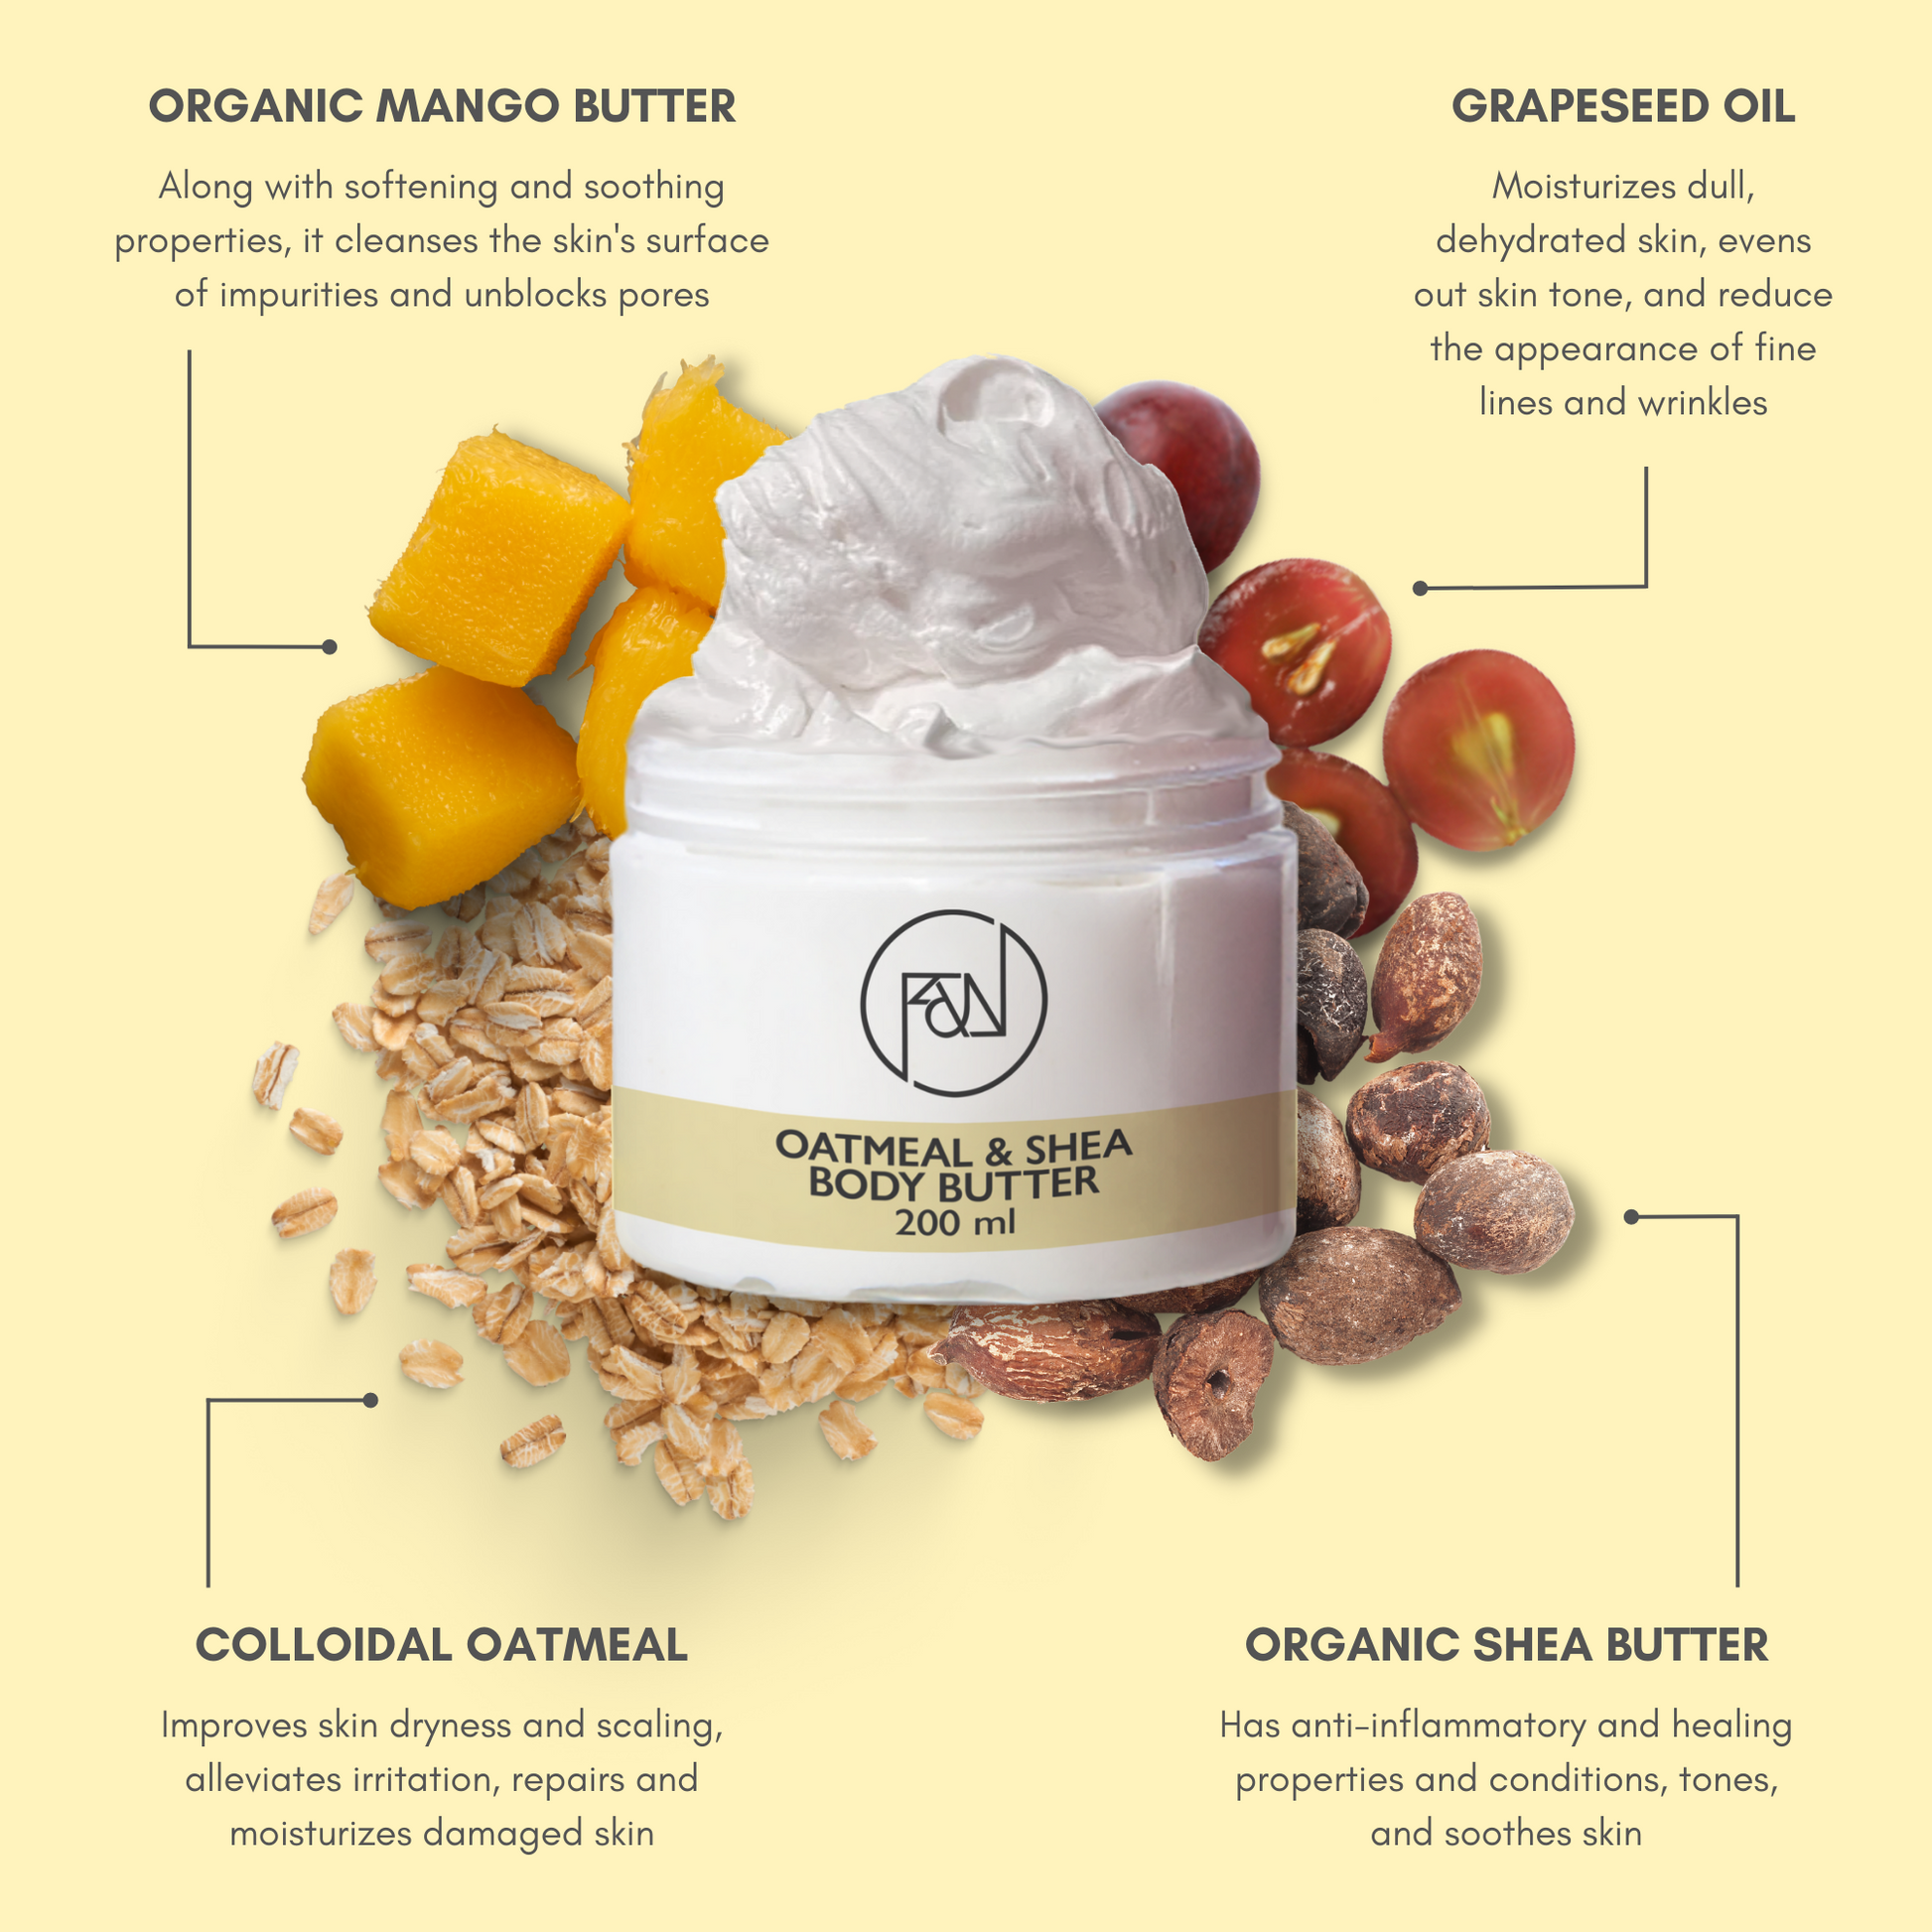 Oatmeal and Shea Body Butter – Flora & Noor